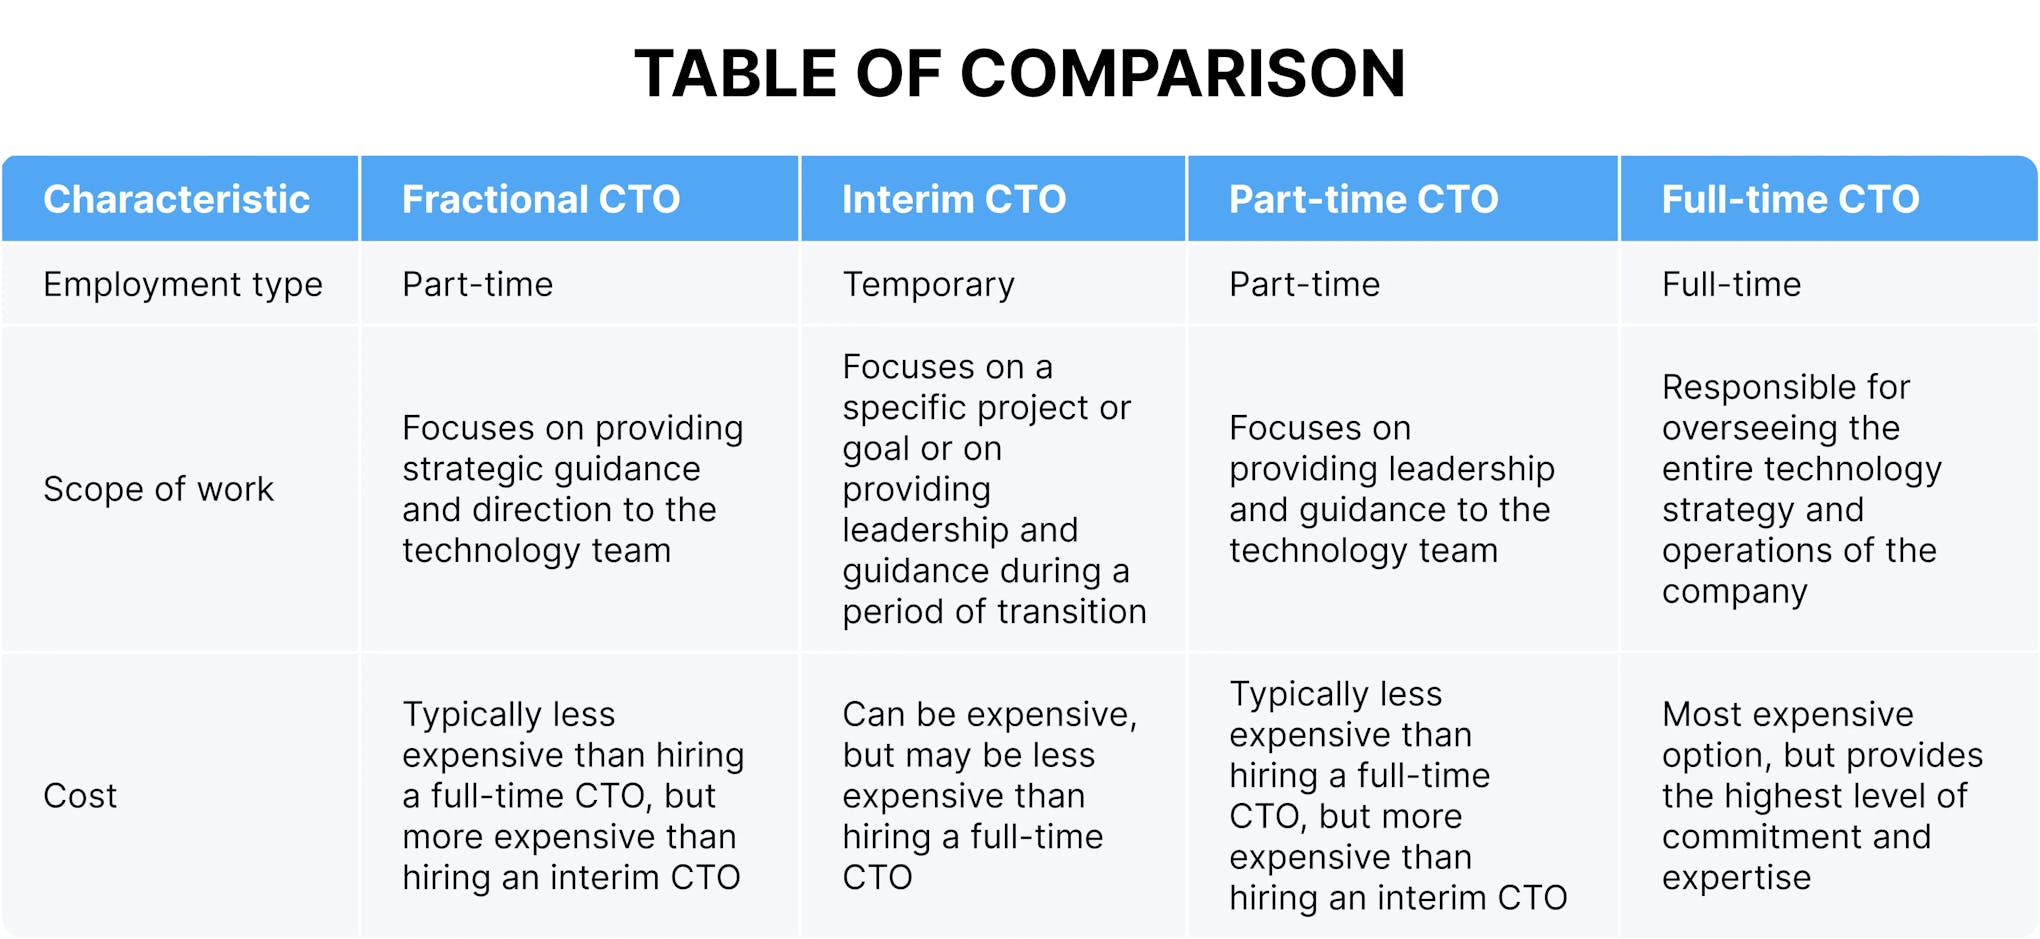 Fractional CTO table of comparison